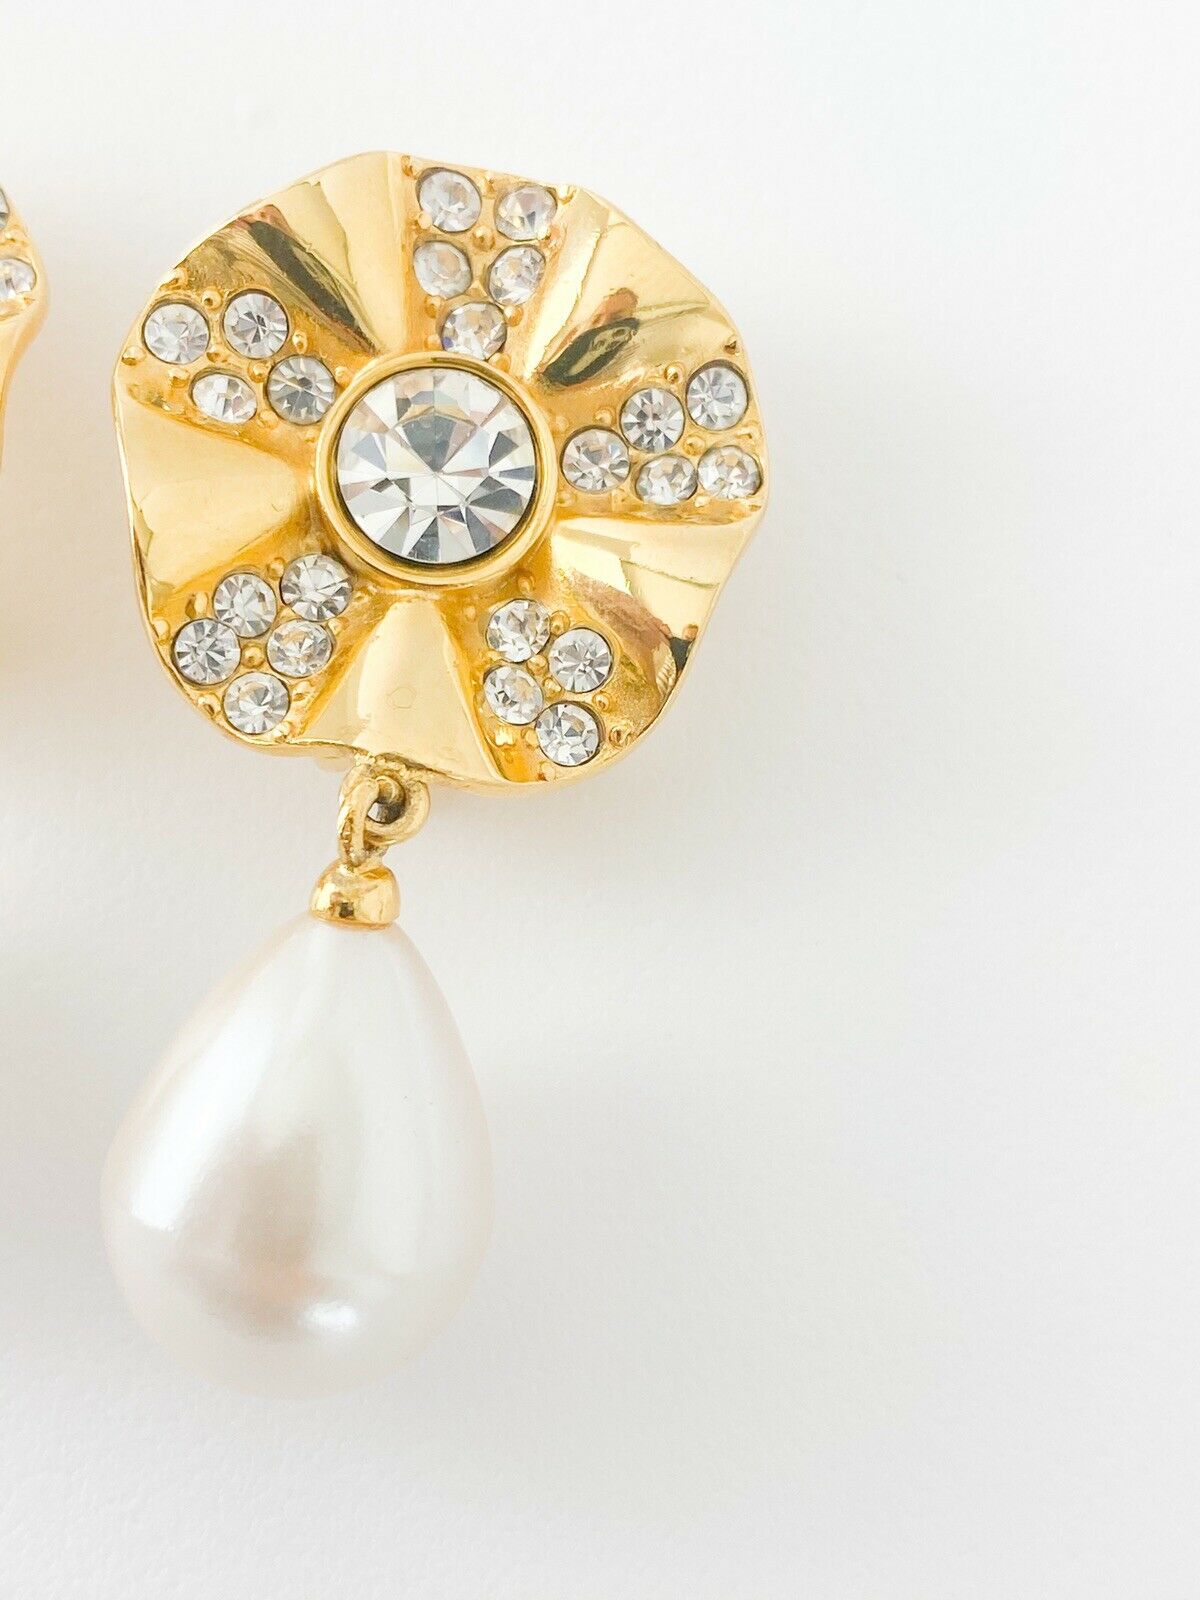 【SOLD OUT】Givenchy Gold Tone Vintage Dangle Earrings Faux Pearls Rhinestones